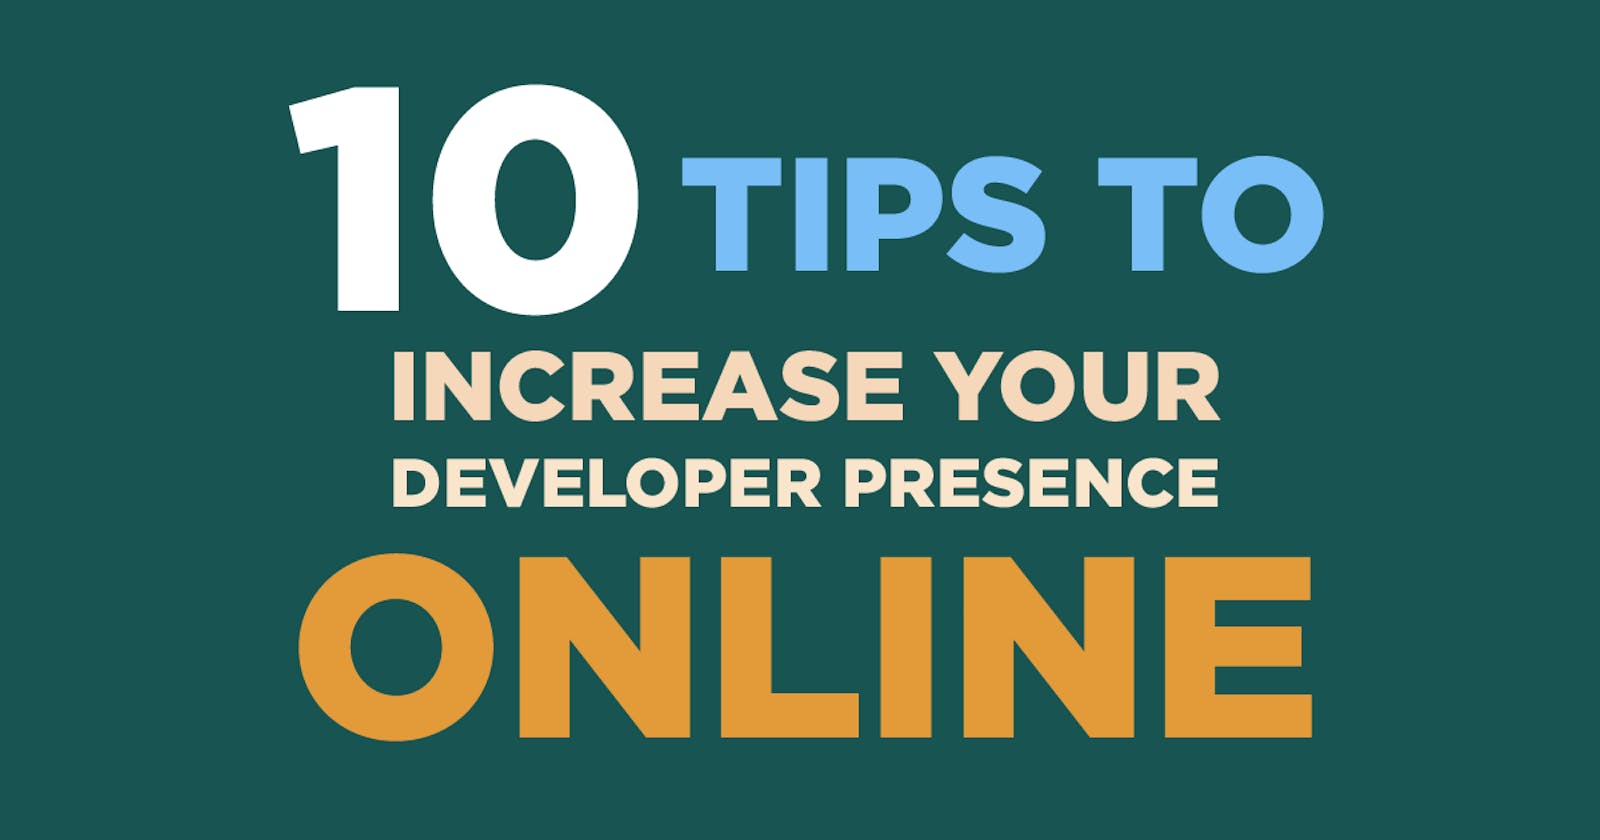 10 tips to increase your developer presence online